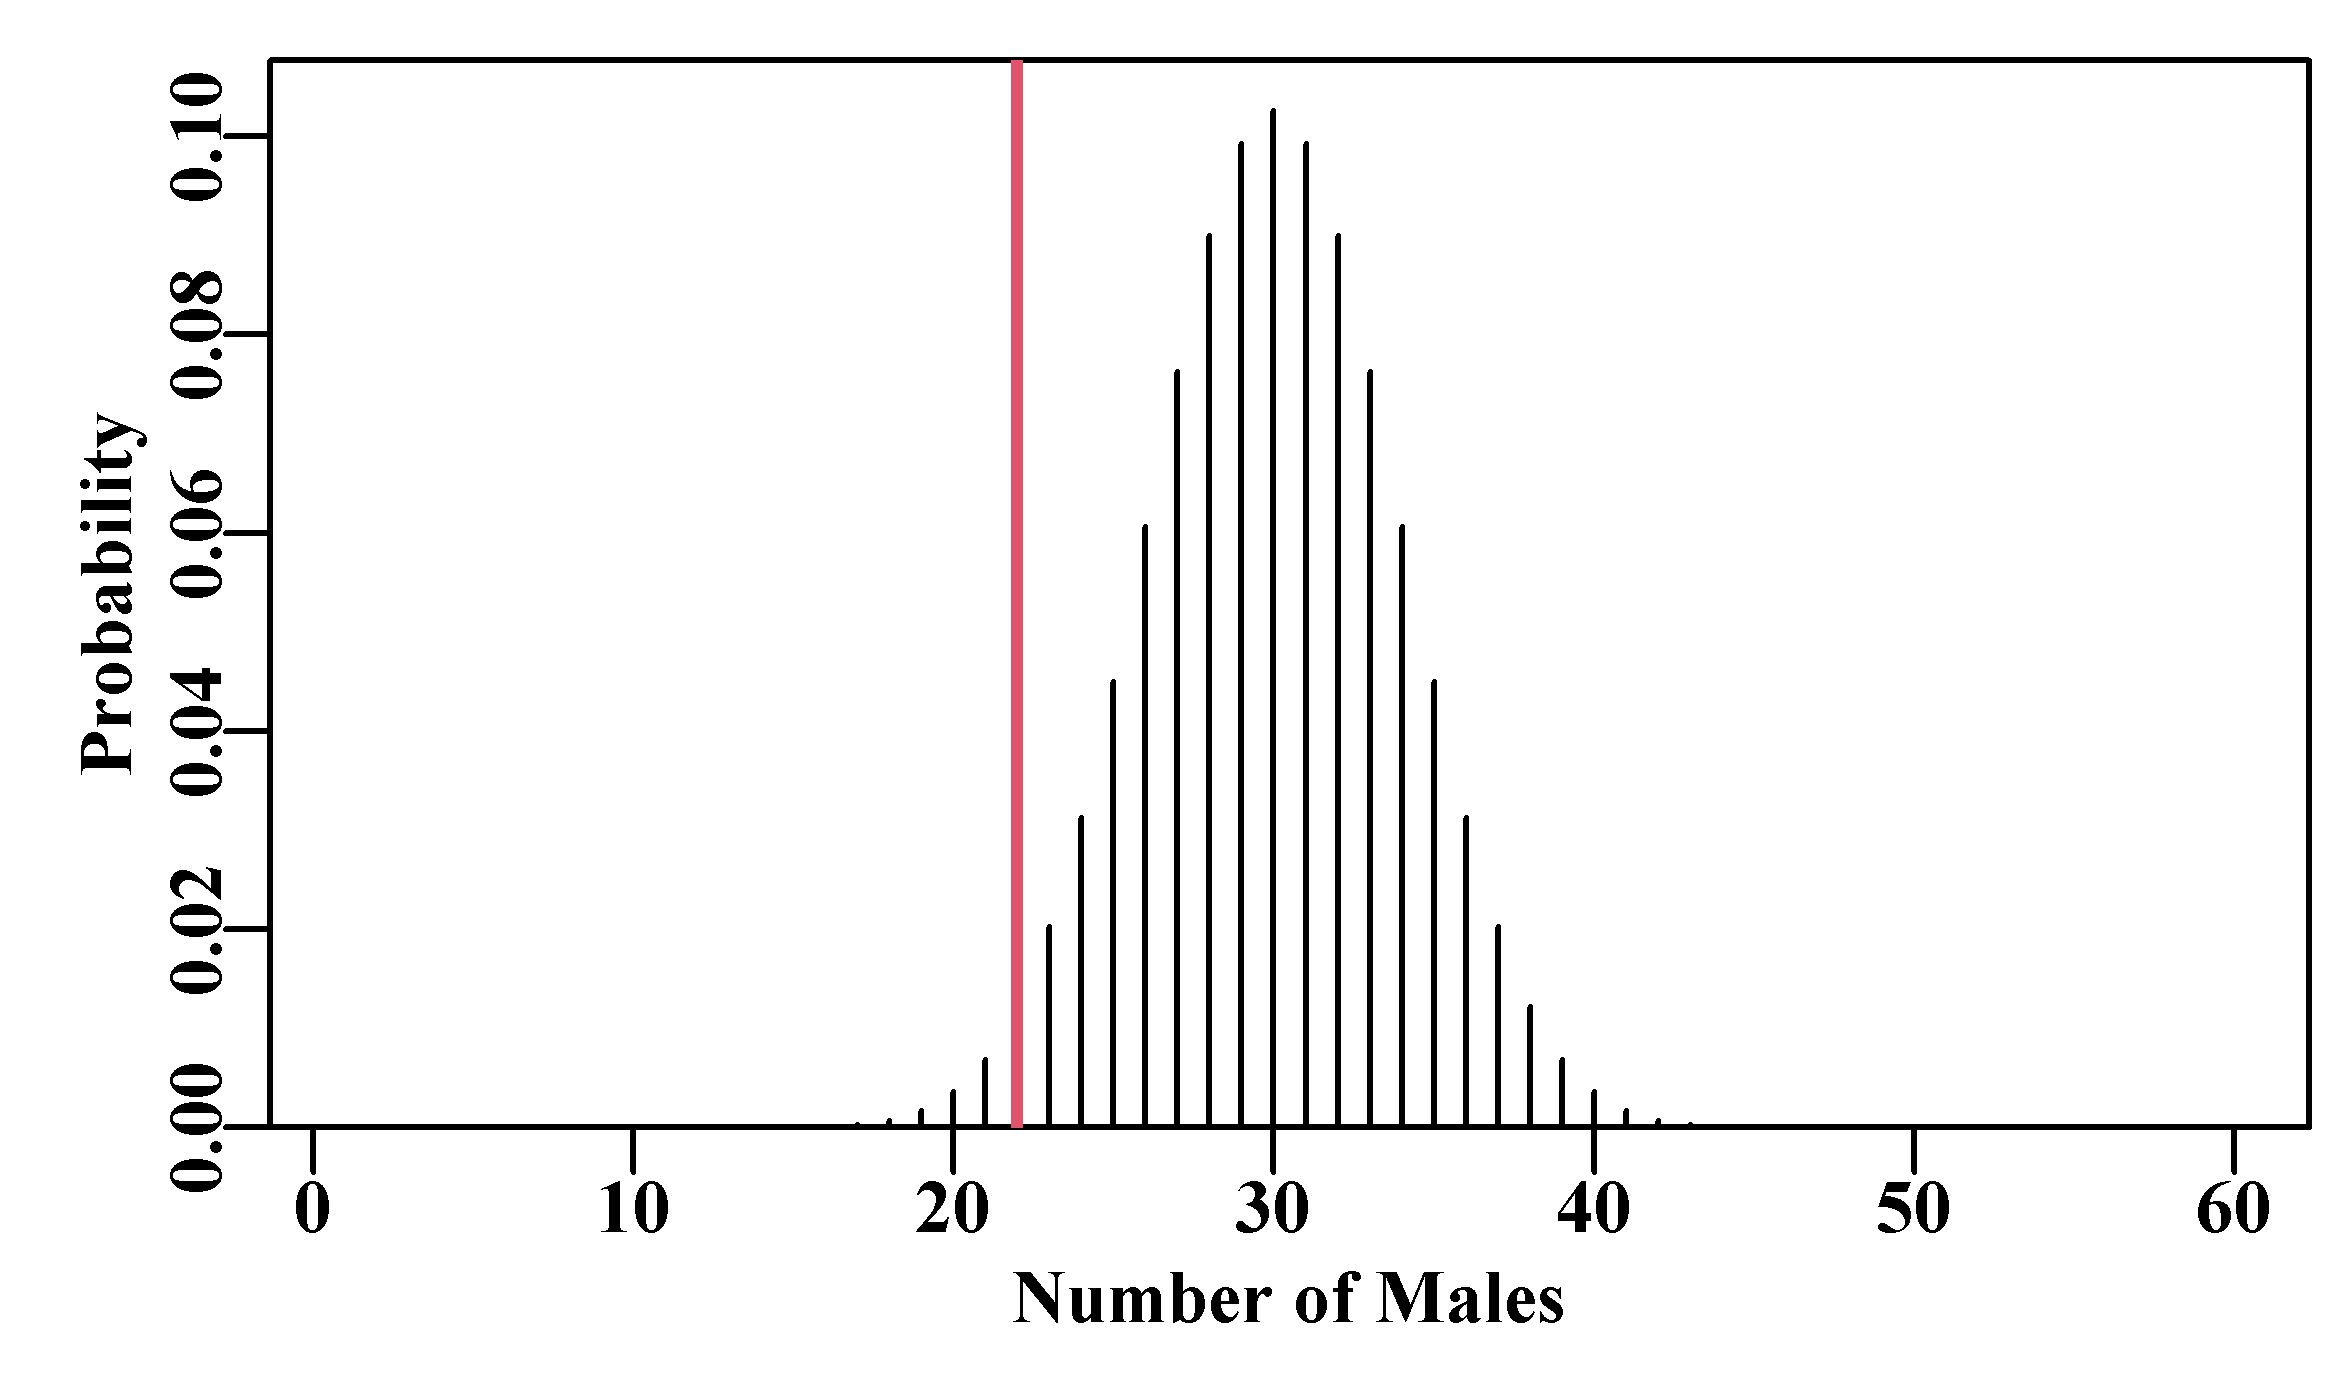 A graphical answer to the question of how likely is it to obtain only 20 males in a sample of 60 animals if the sex ratio is 1:1. The vertical red line is the lower bound of the 95% confidence intervals, which suggests that observing only 20 would be unlikely.